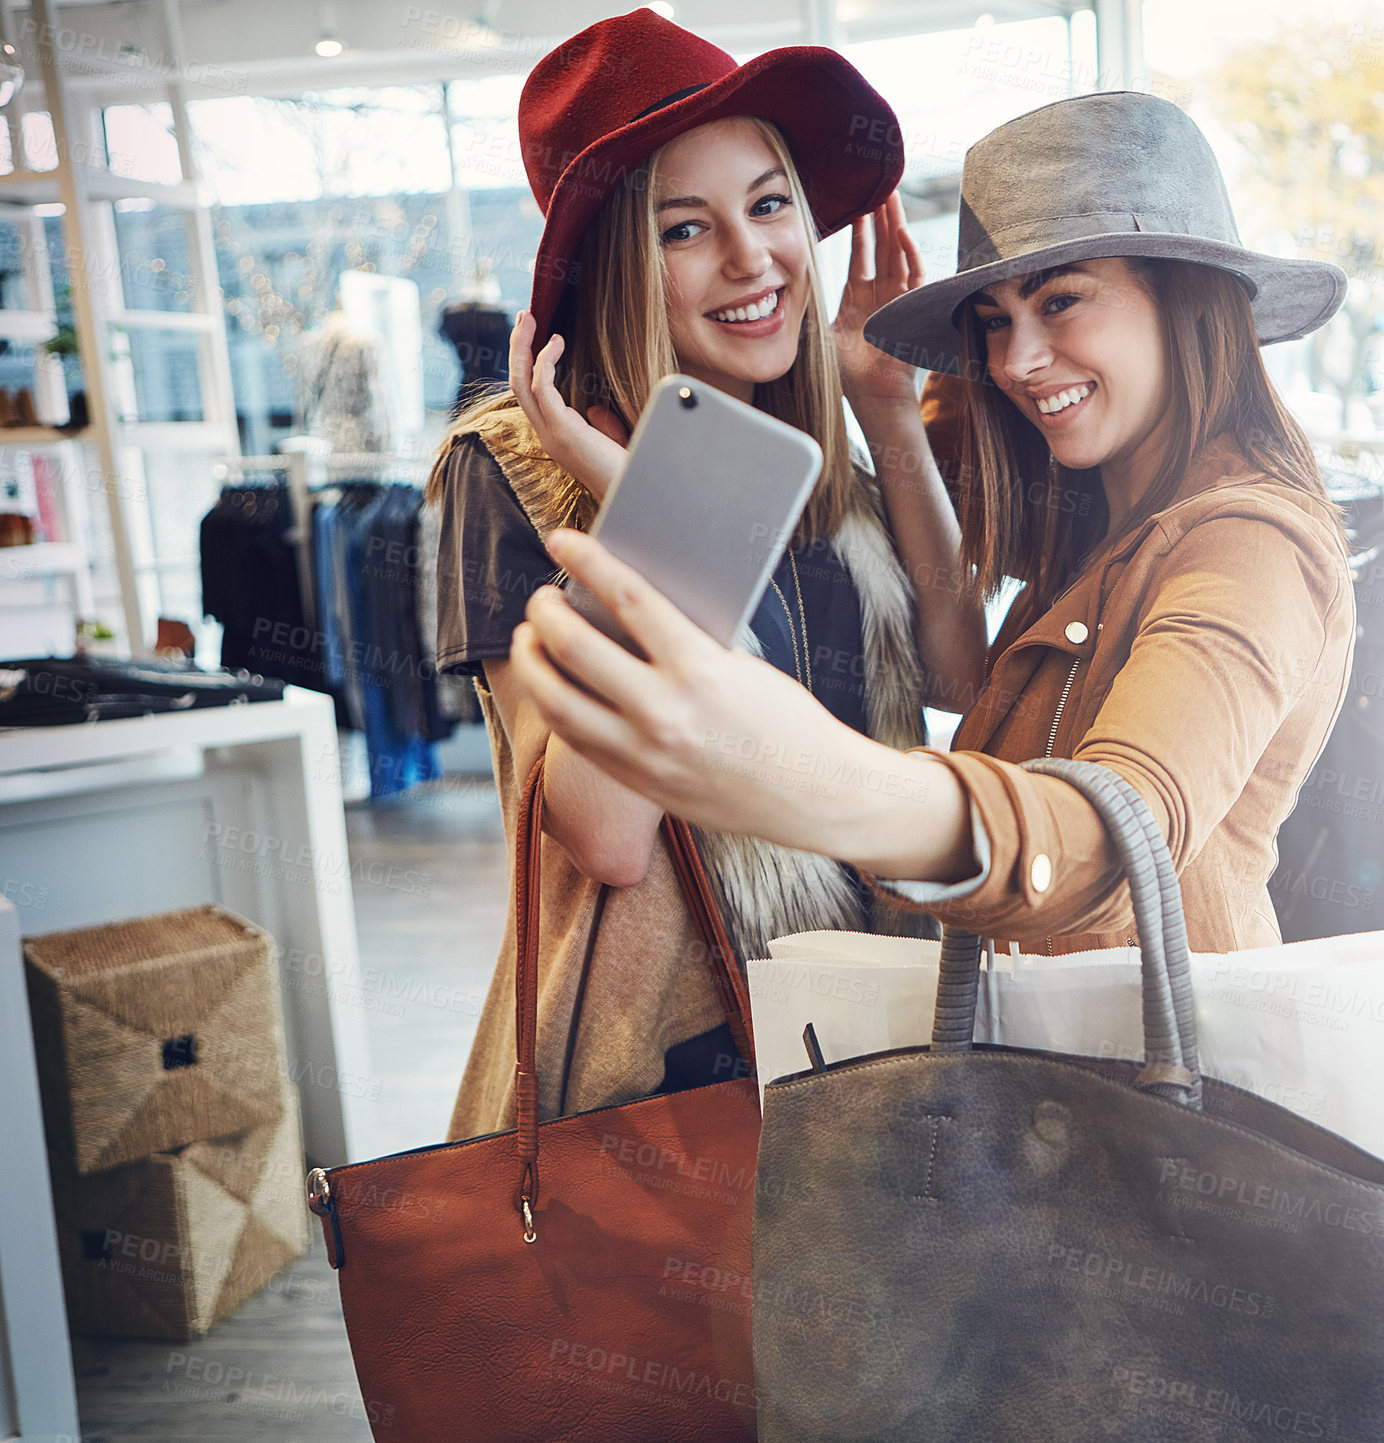 Buy stock photo Cropped shot of two young girlfriends snapping selfies while out on a shopping spree